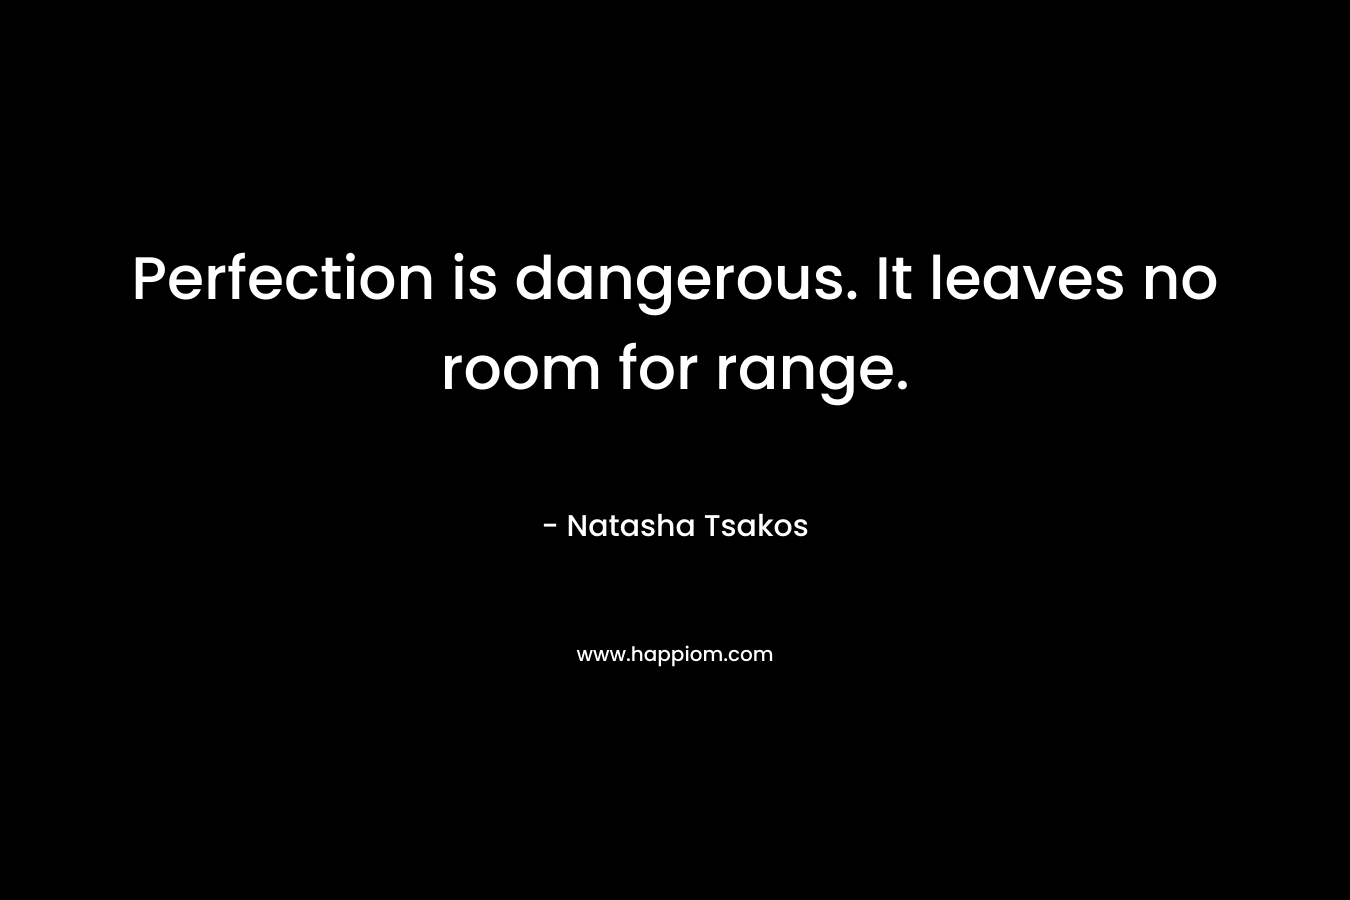 Perfection is dangerous. It leaves no room for range.